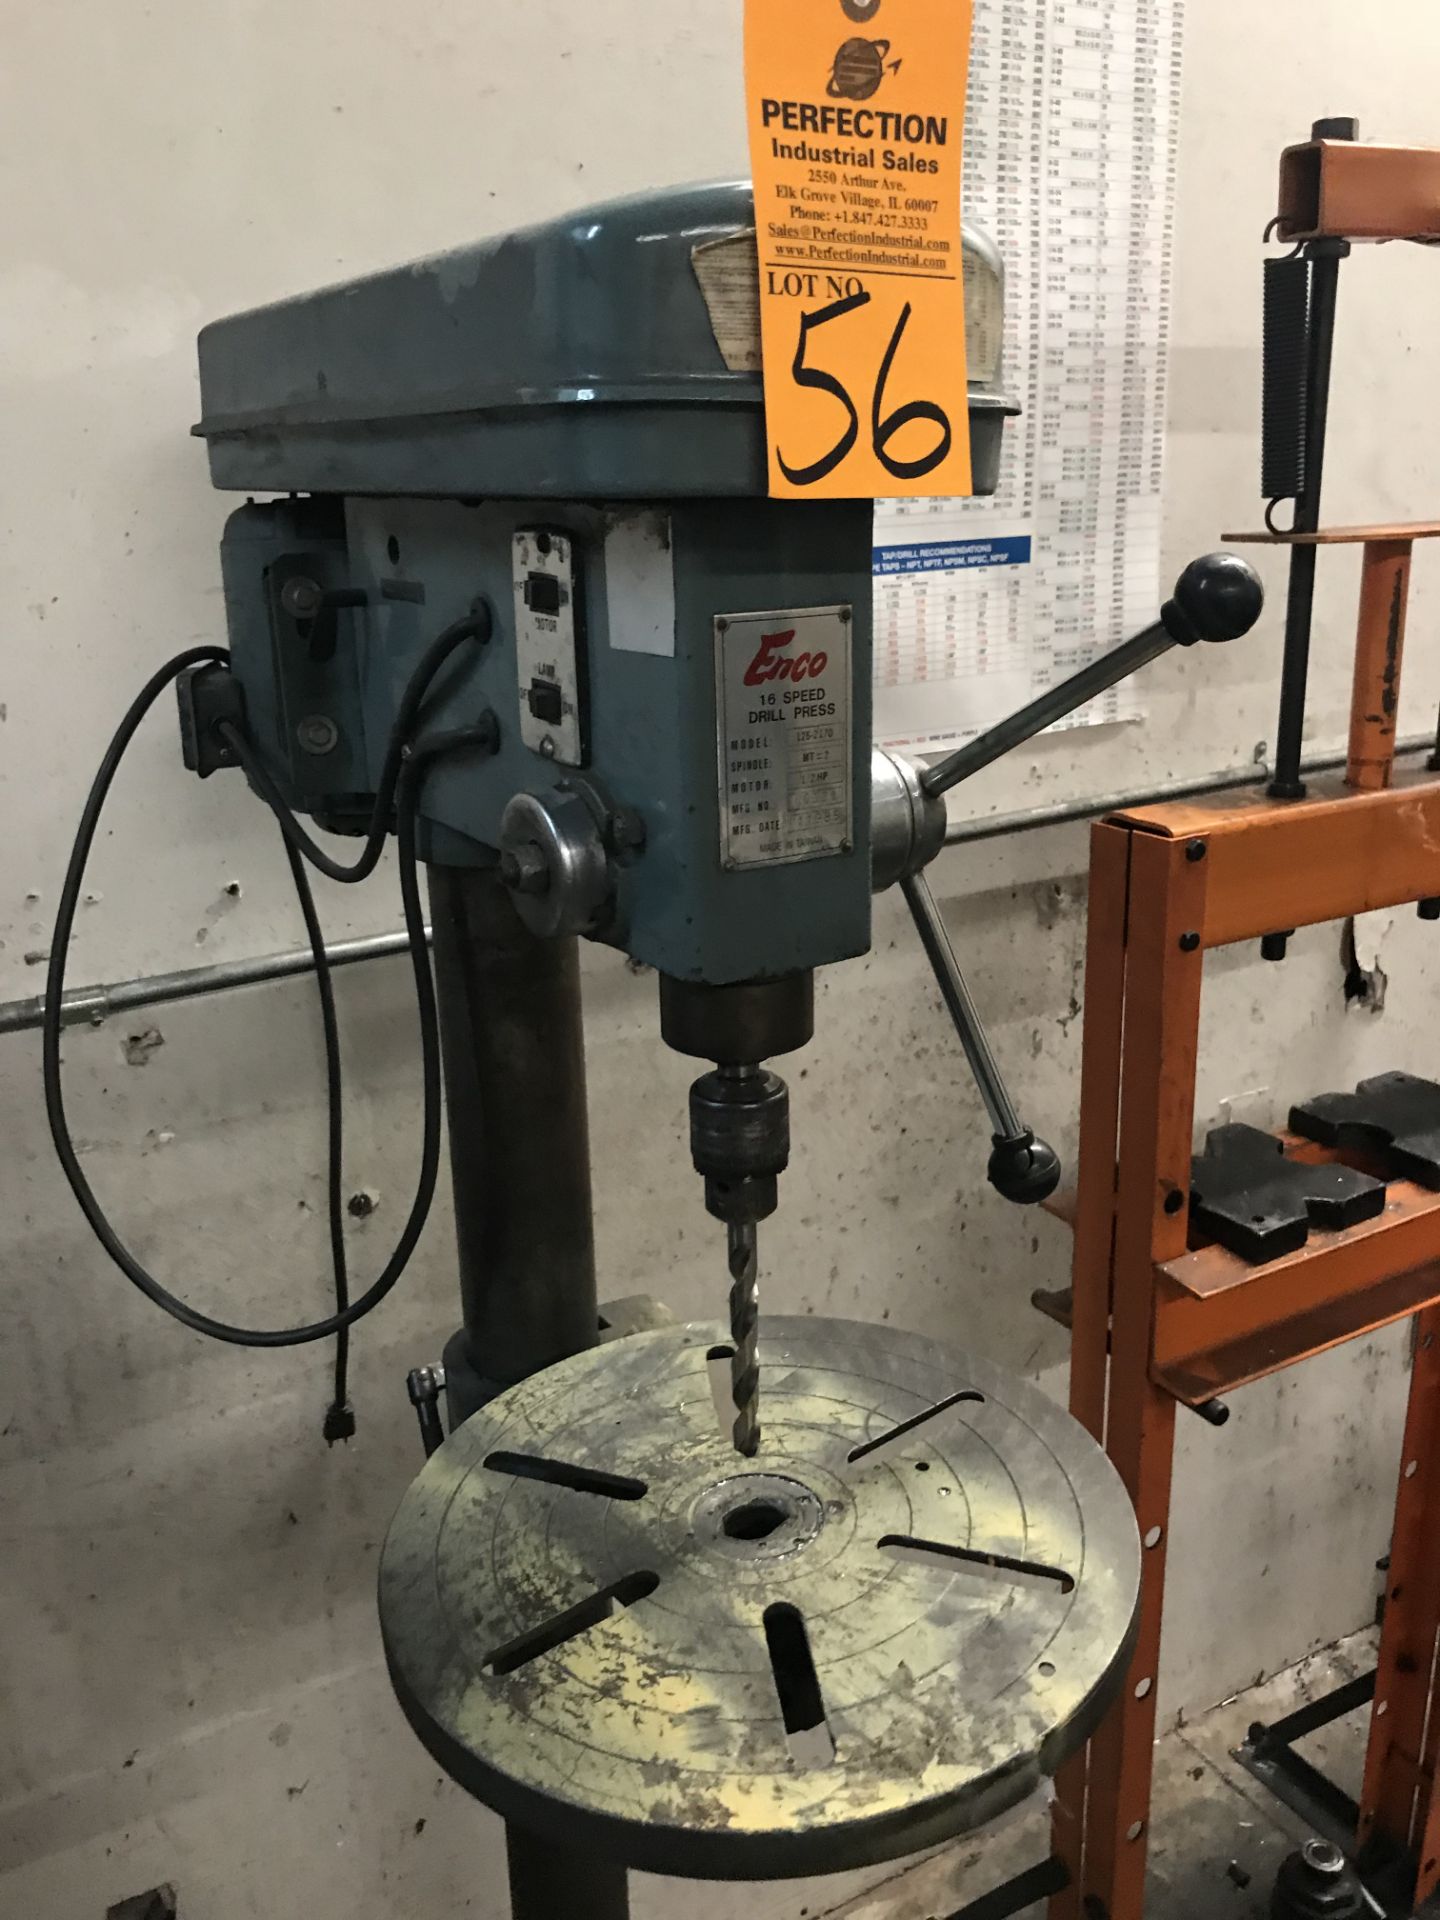 Enco 126-2170 16-Speed Drill Press, s/n 60331 - Image 2 of 2